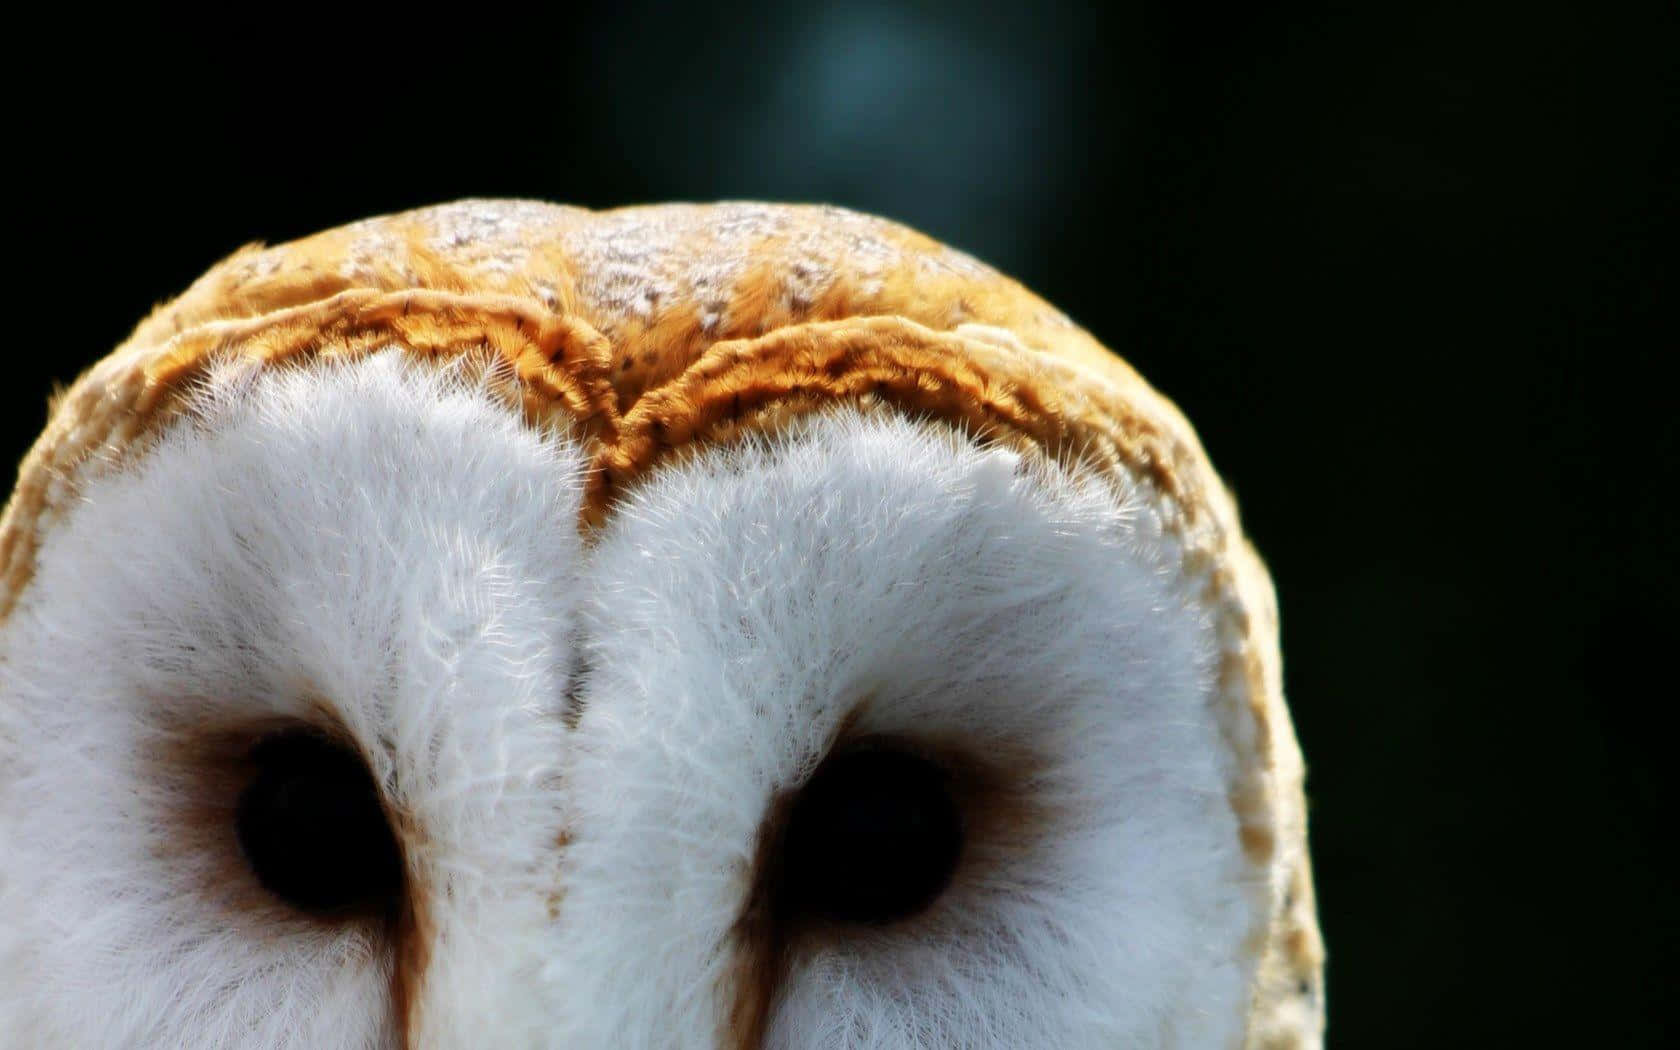 A barn owl's keen eyesight helps it hunt during the night